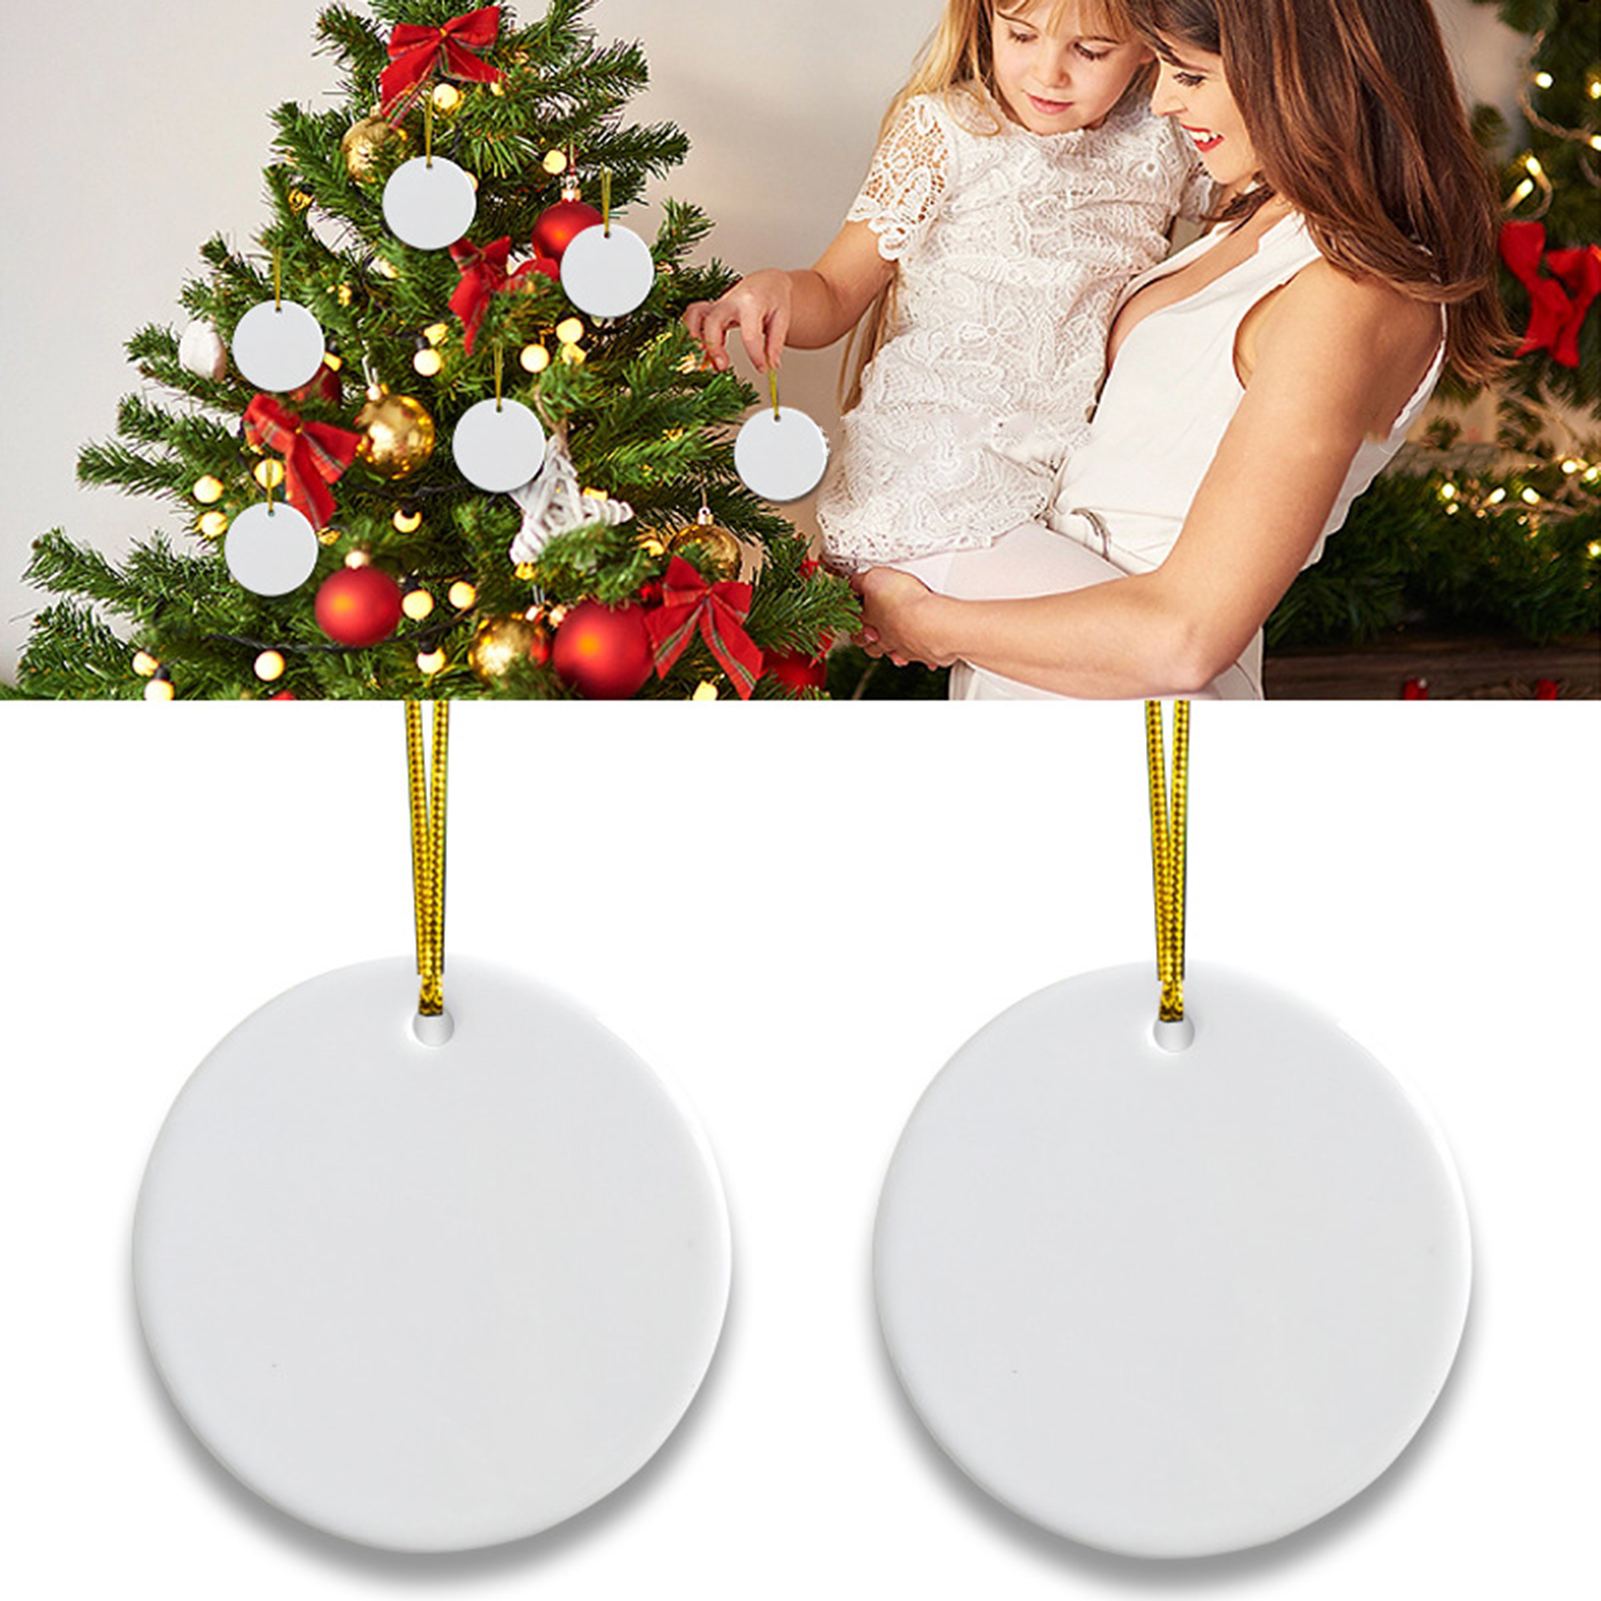 D-groee 1 Set Sublimation Ceramic Ornament Bulk White 2.87 inch Round Blank Ornament with Gold String for Crafting DIY Personalized Christmas Home